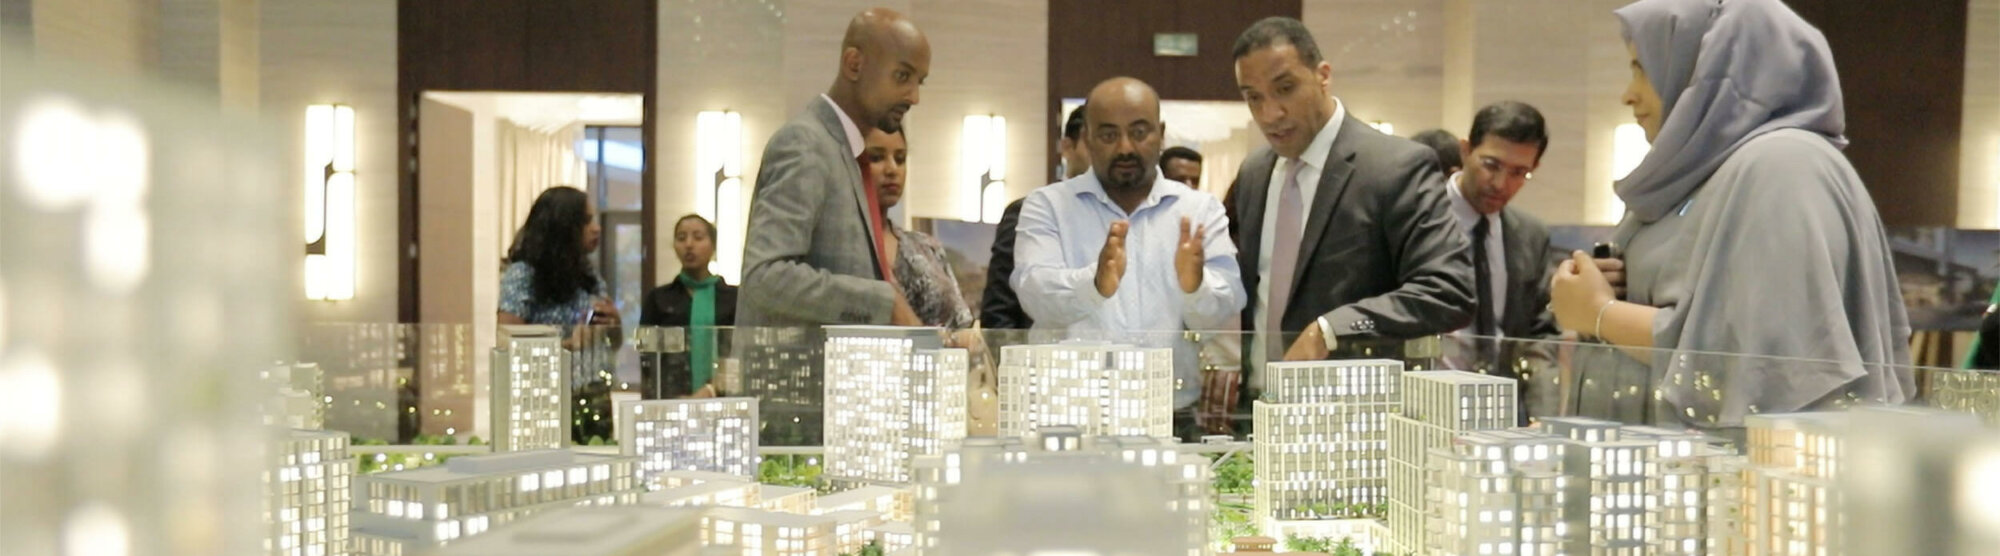 La Gare, one of Ethiopia’s largest mixed-use developments